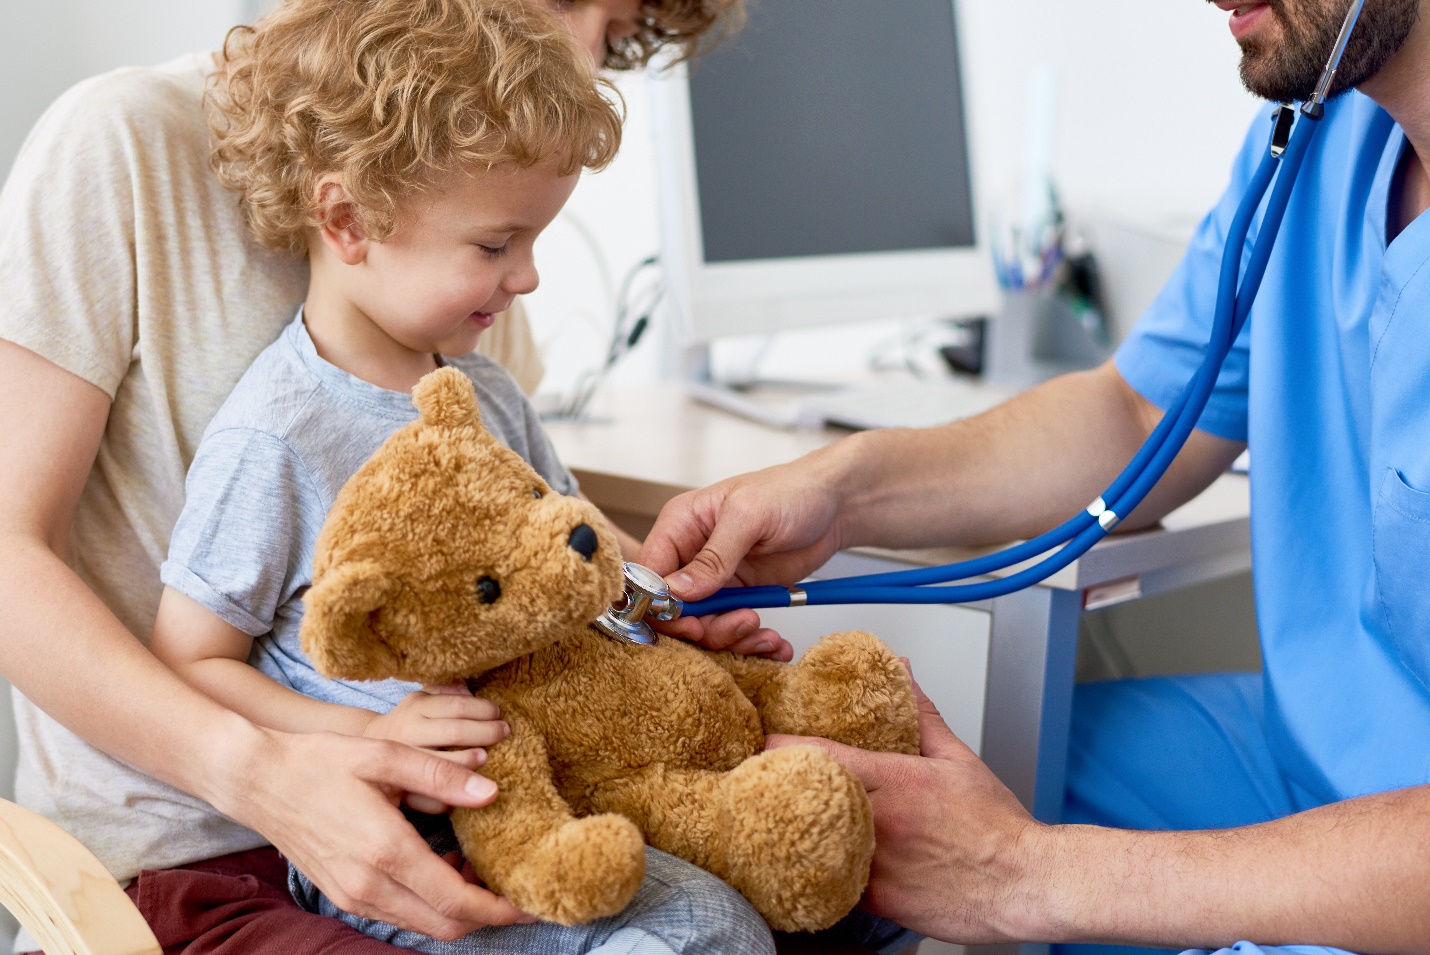 child holding teddy bear toy with pediatrician listening to heartbeat using stethoscope